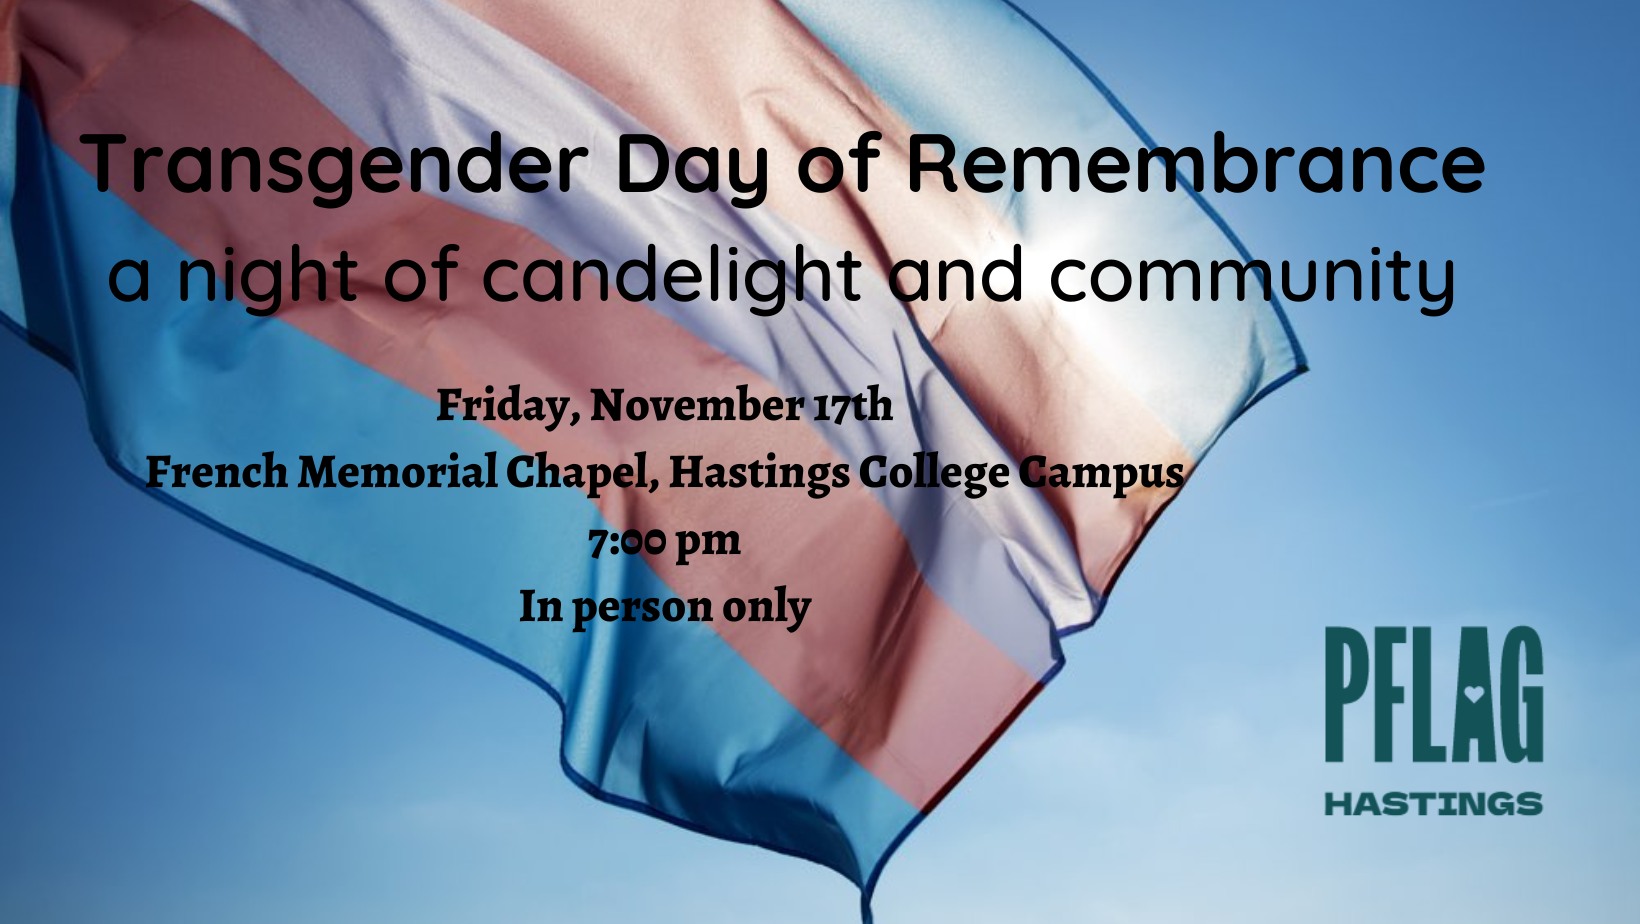 Transgender Day of Remembrance: A night of candelight and community Friday, November 17th French Memorial Chapel, Hastings College Campus 7:00 pm In person only